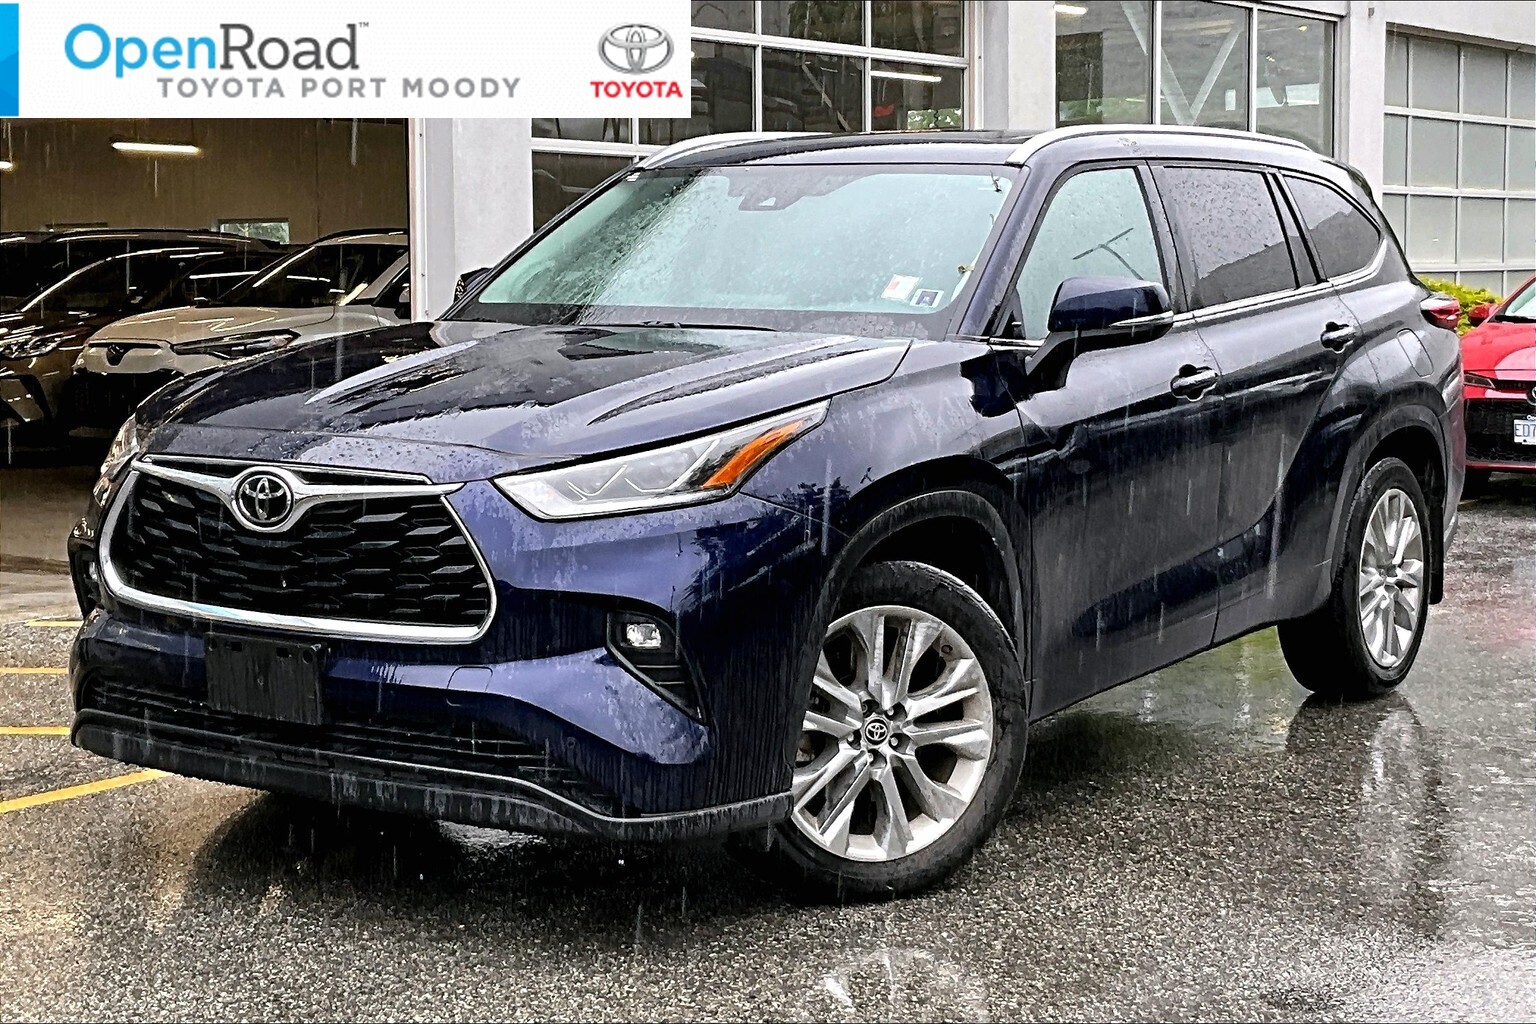 2021 Toyota Highlander Limited AWD |OpenRoad True Price |One Owner |No Cl